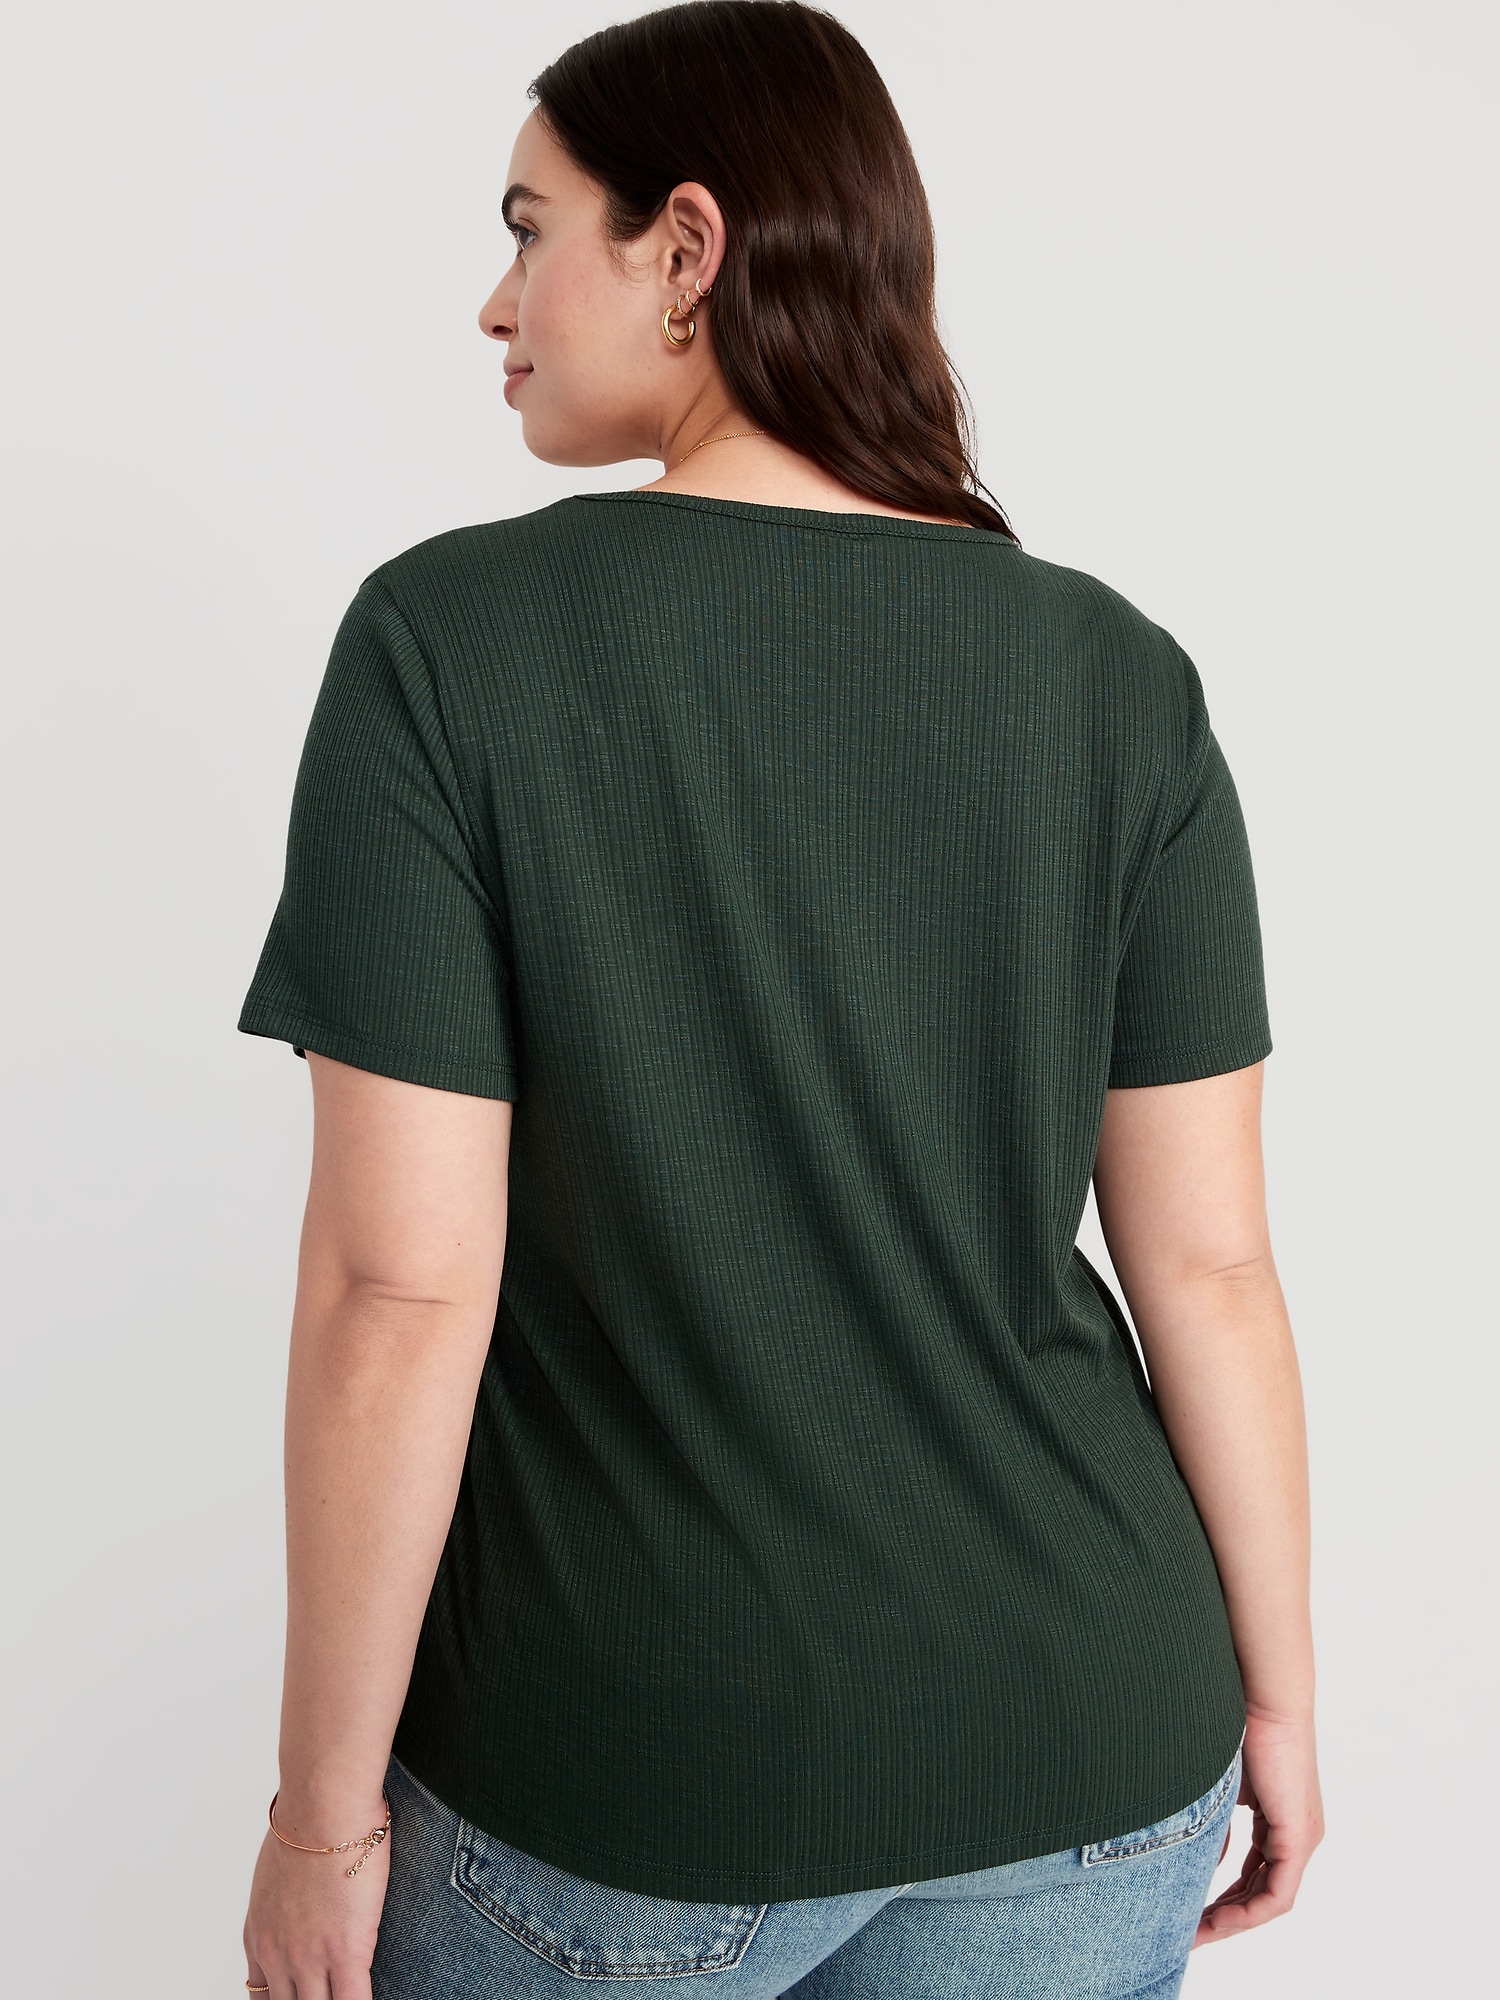 Ribbed for Luxe Women Old Navy V-Neck T-Shirt Slub-Knit |